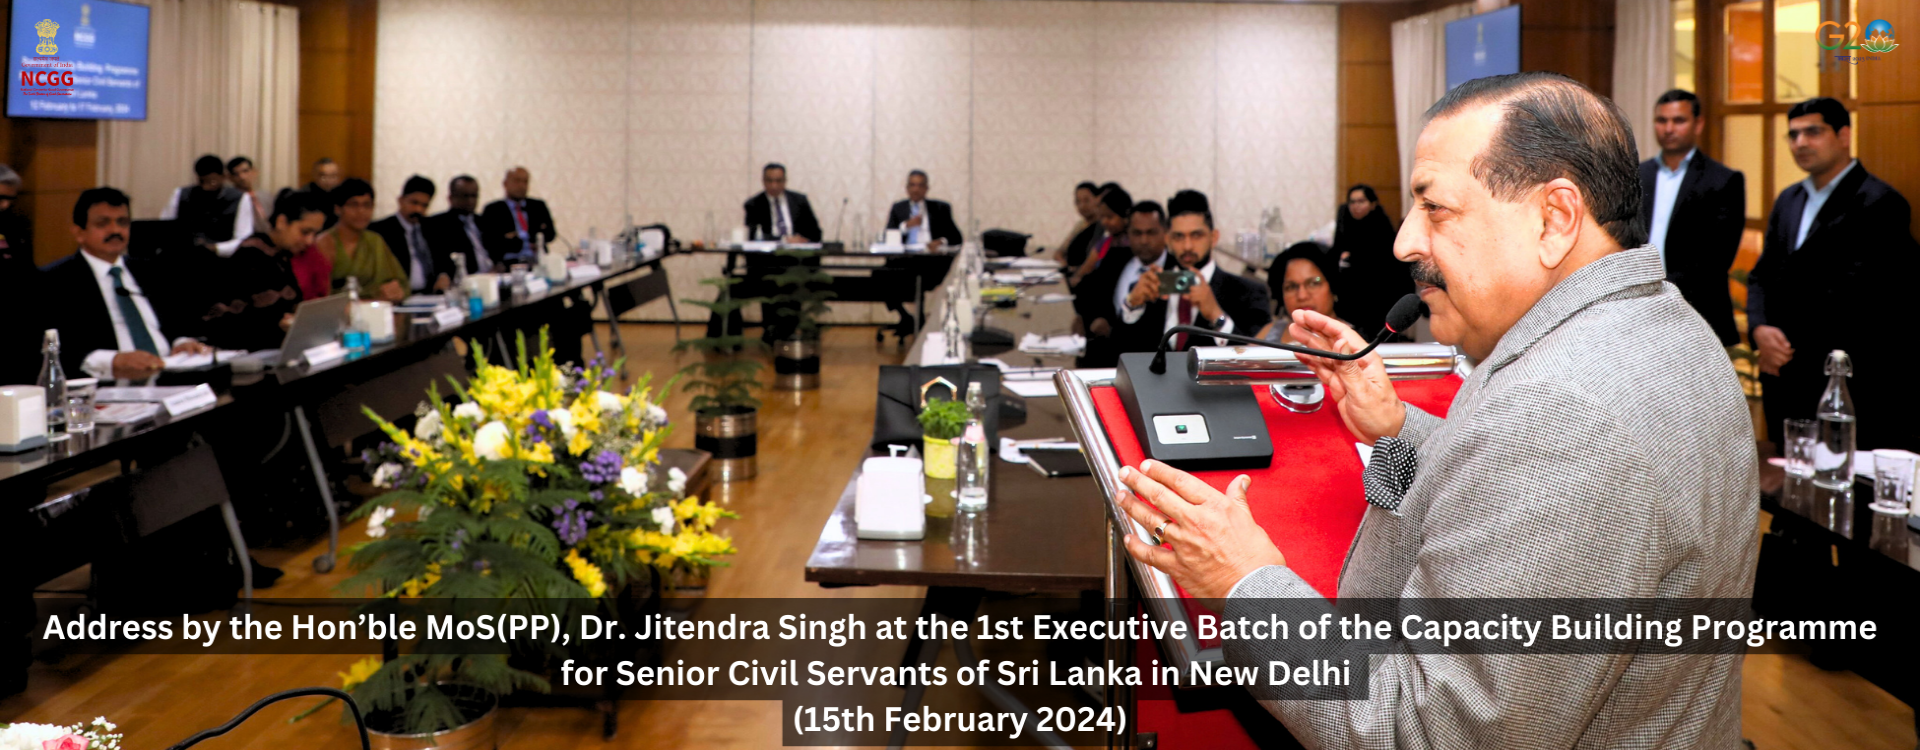 Address by the Hon’ble MoS(PP), Dr. Jitendra Singh at the 1st Executive Batch of the Capacity Building Programme for Senior Civil Servants of Sri Lanka in New Delhi (12th - 17th February 2024)